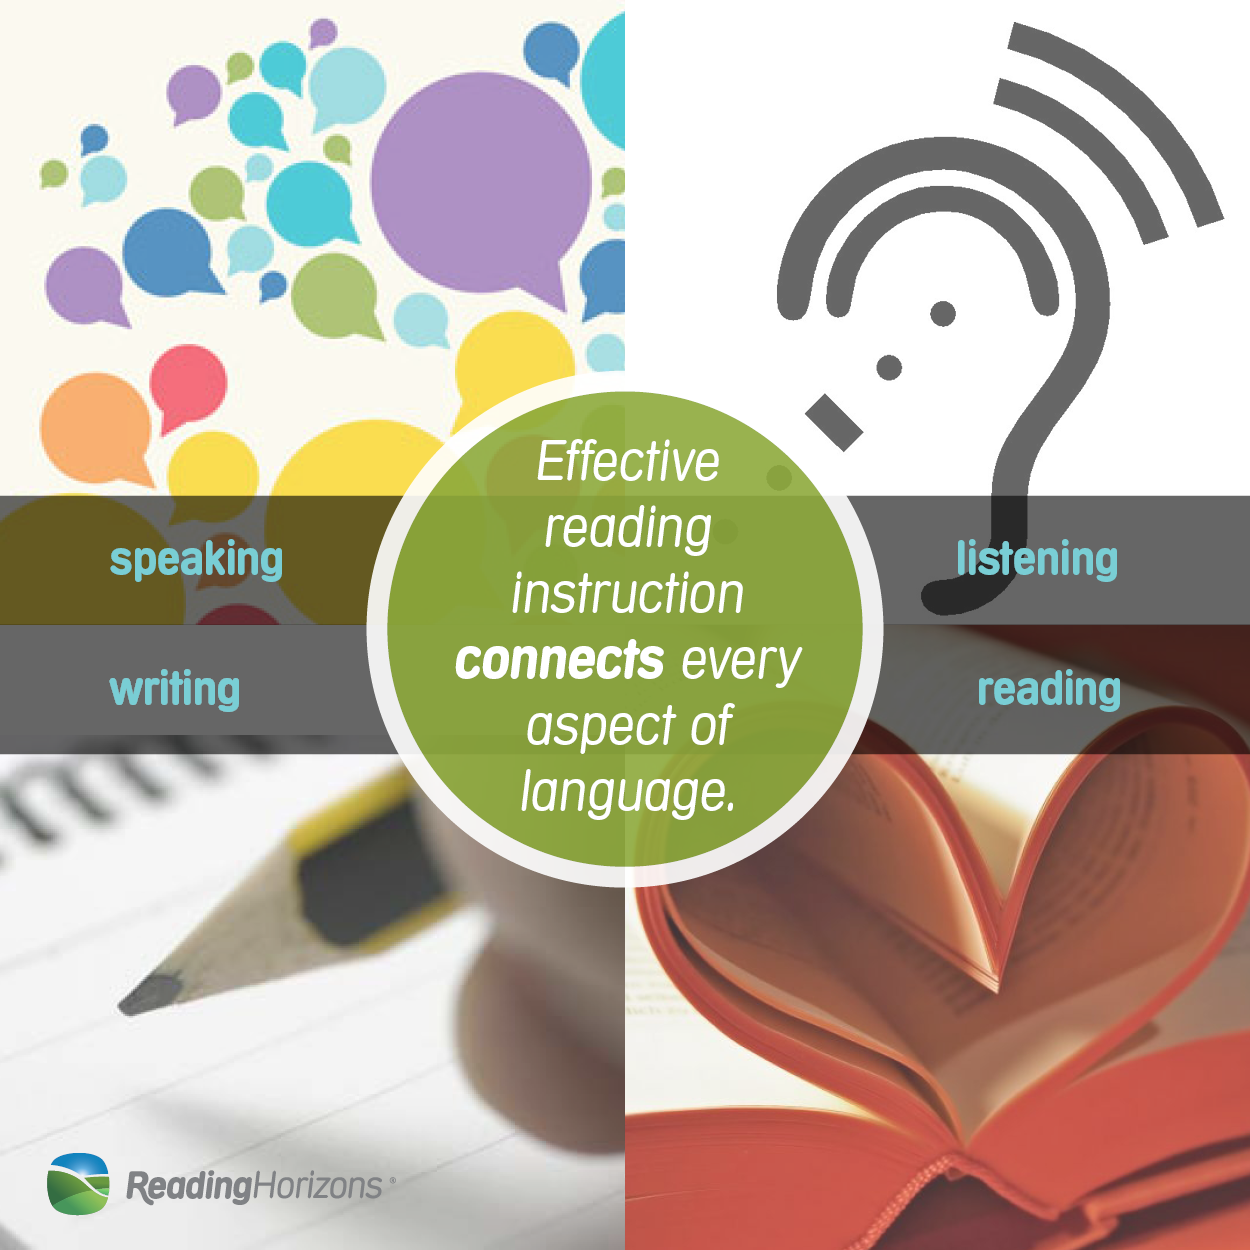 Reading and writing 4 answers. Английский reading Listening writing. Listening reading writing speaking. Значки speaking Listening. Значки reading writing Listening.